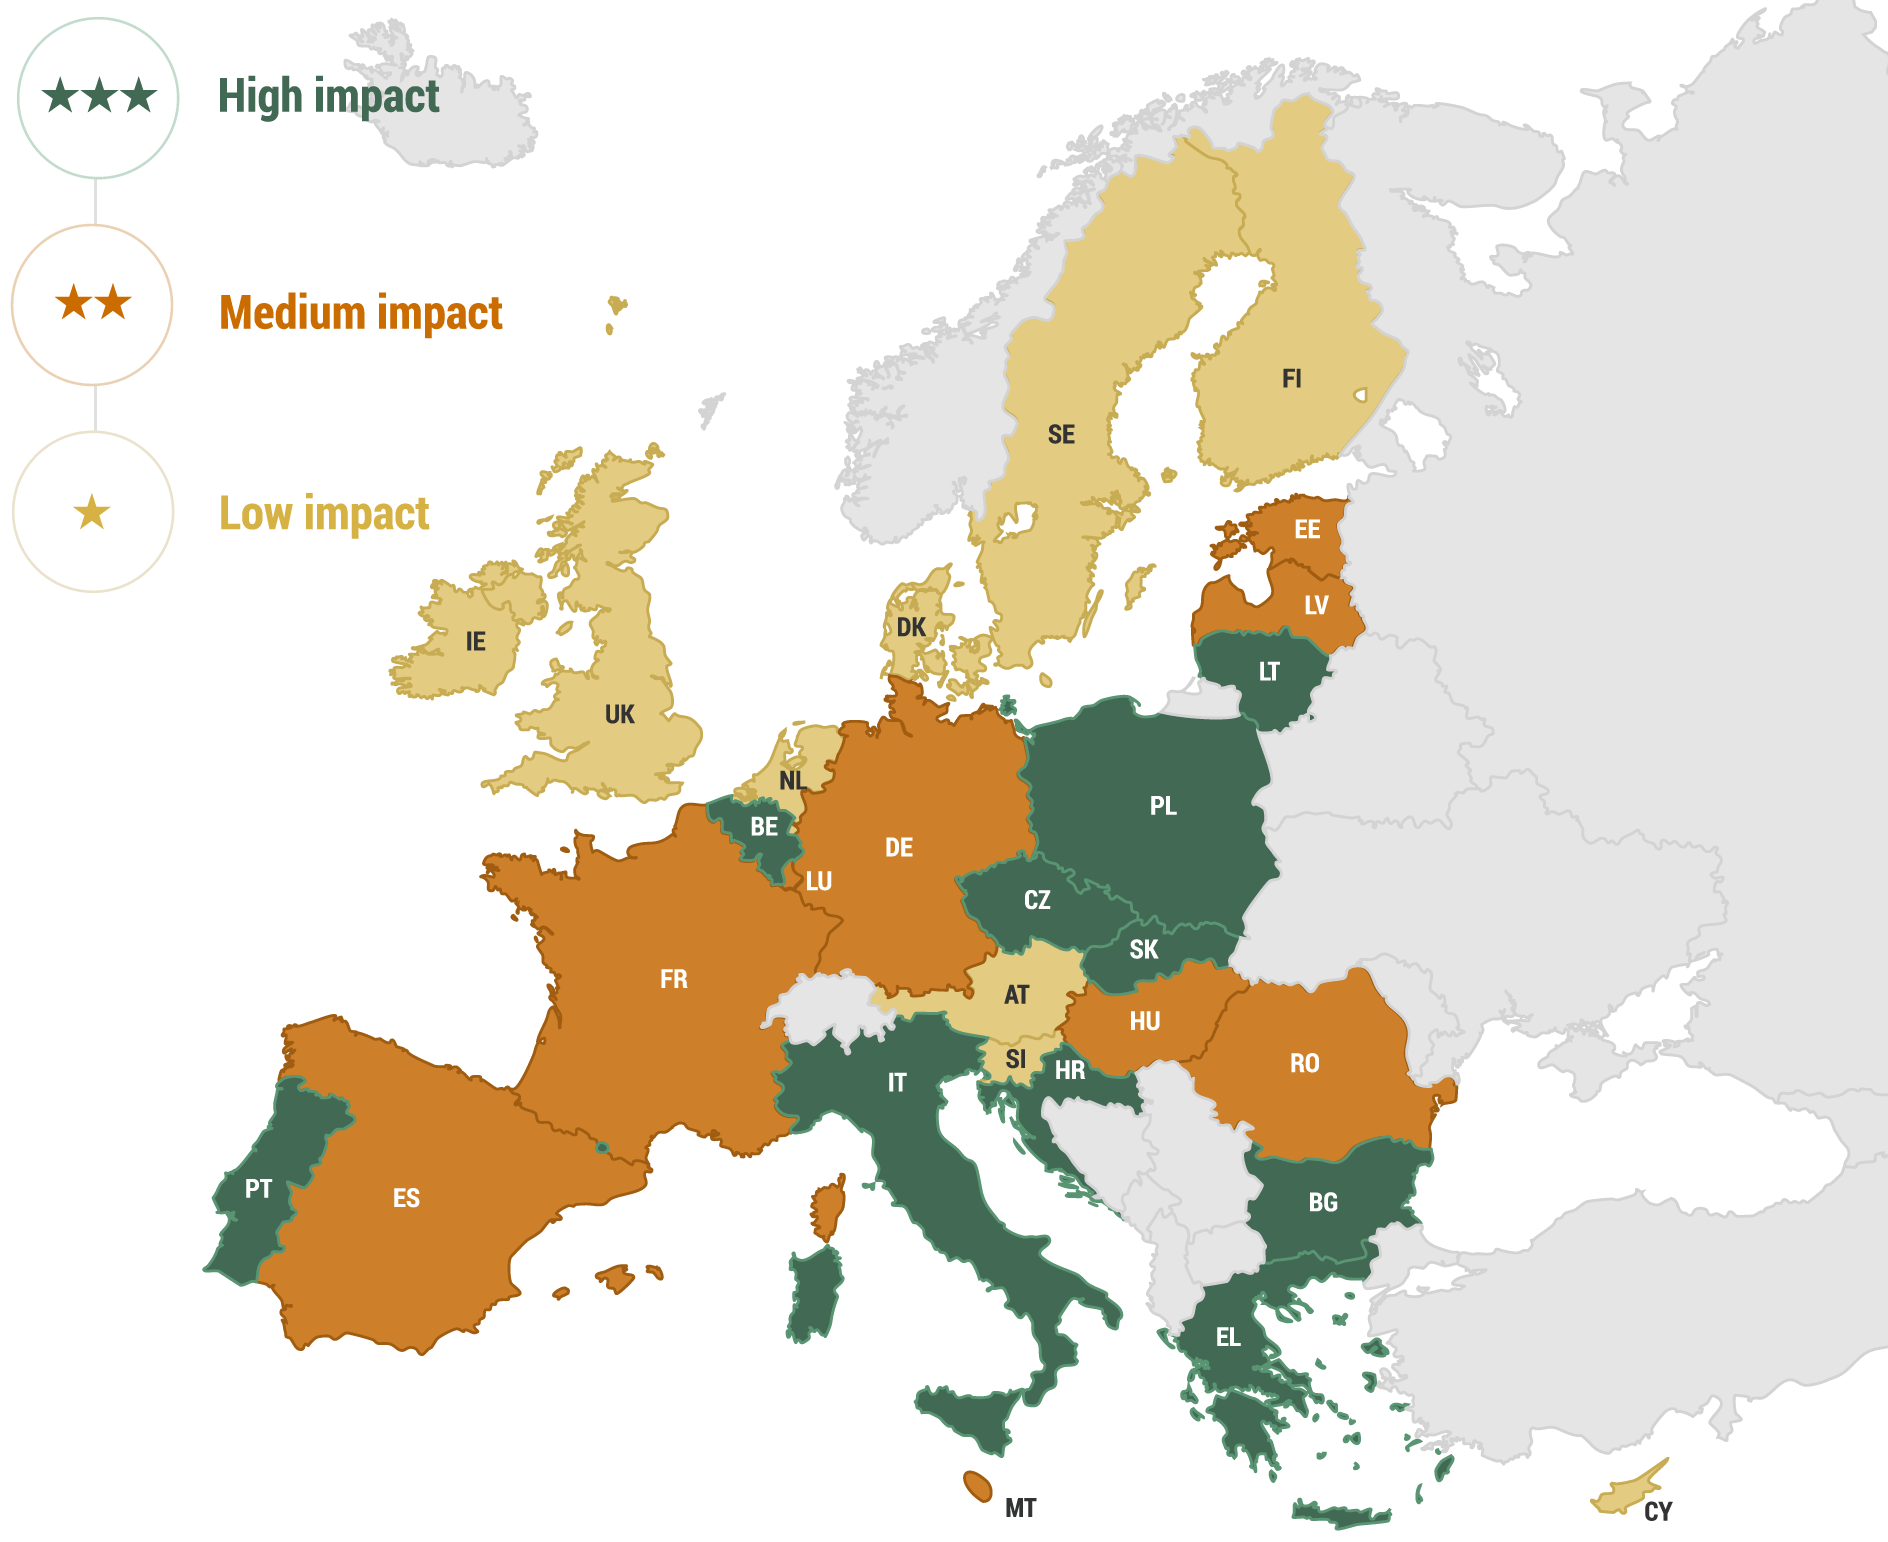 EU map with high, medium and low impact countries.